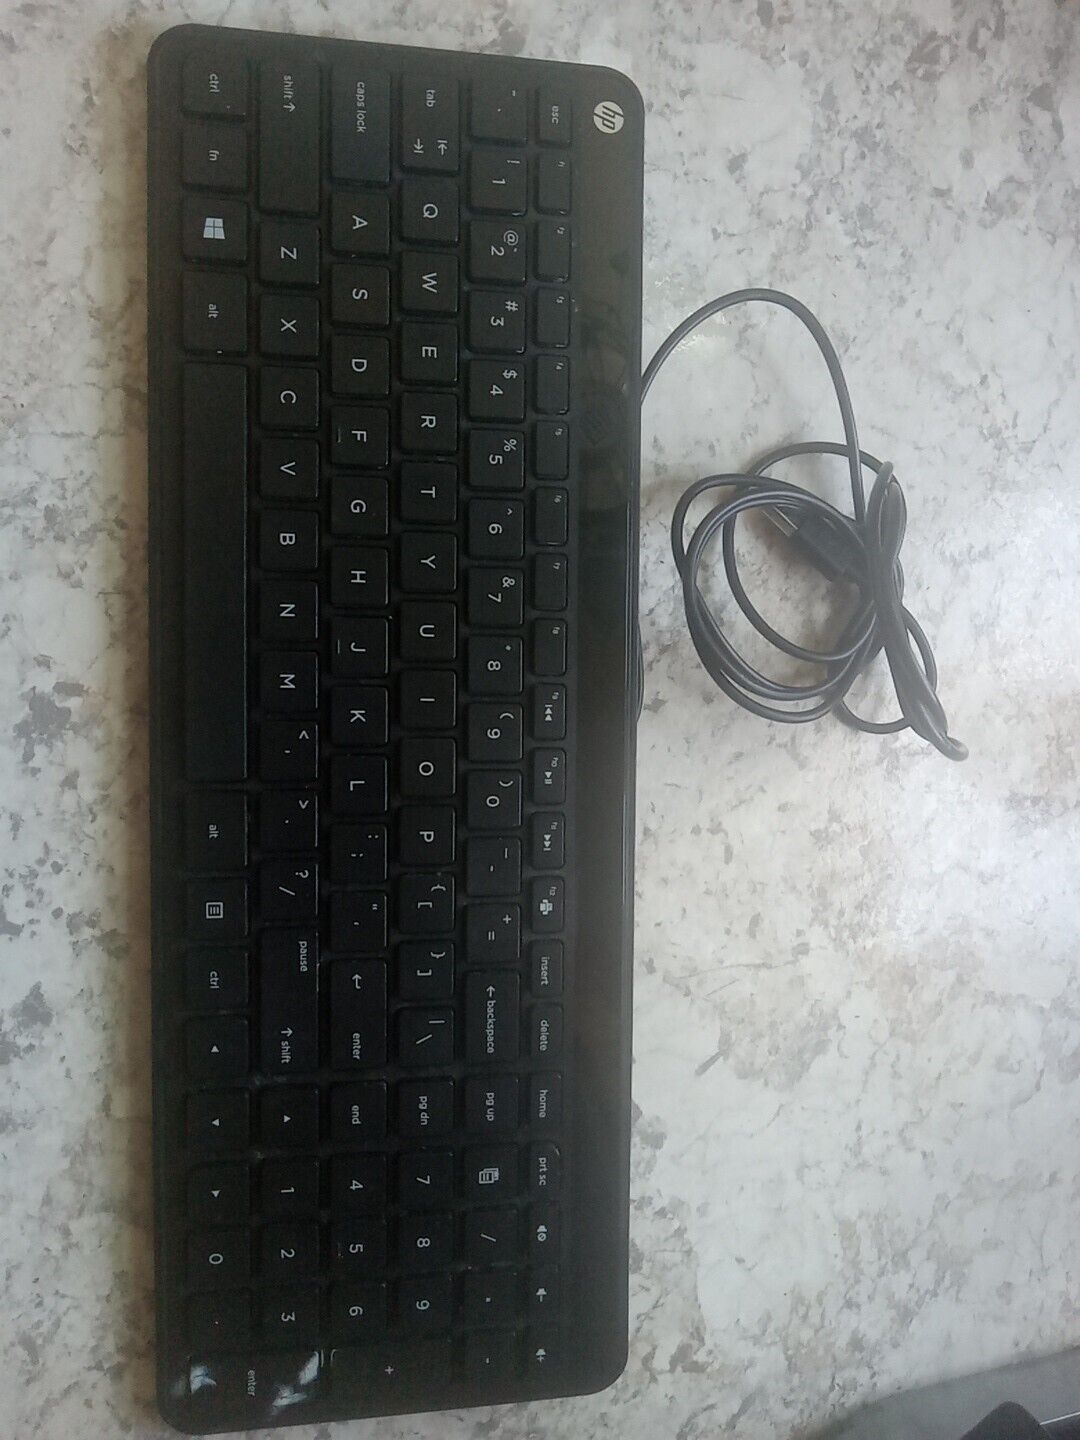 Slim Wired HP SK-2028 US Keys USB PC Keyboard Black Tested - Excellent Condition